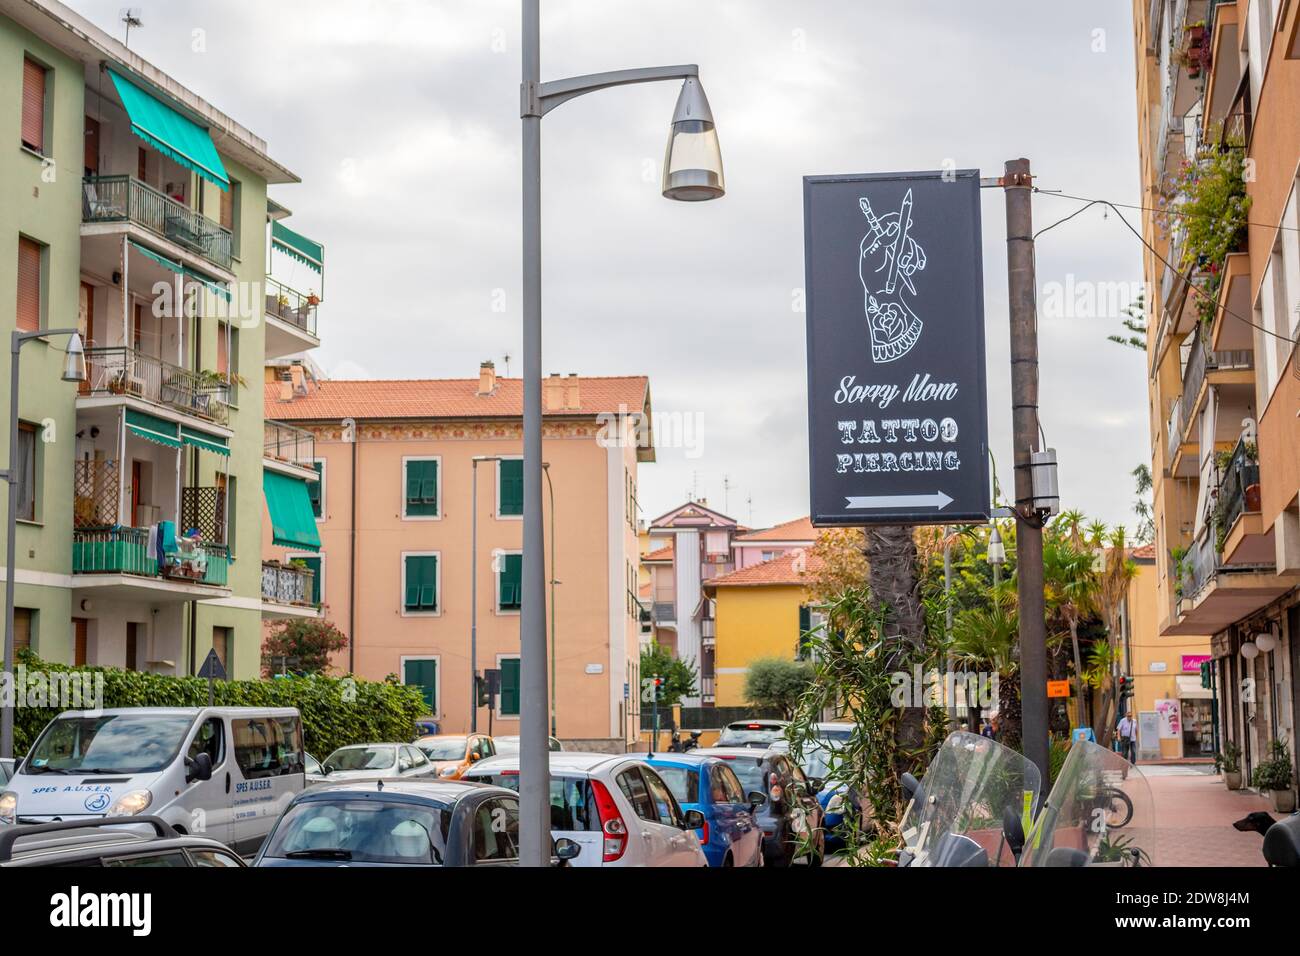 General view of the Sorry Mom tattoo parlor sign under clouds on September 12, 2019 in Ventimiglia, Italy Stock Photo